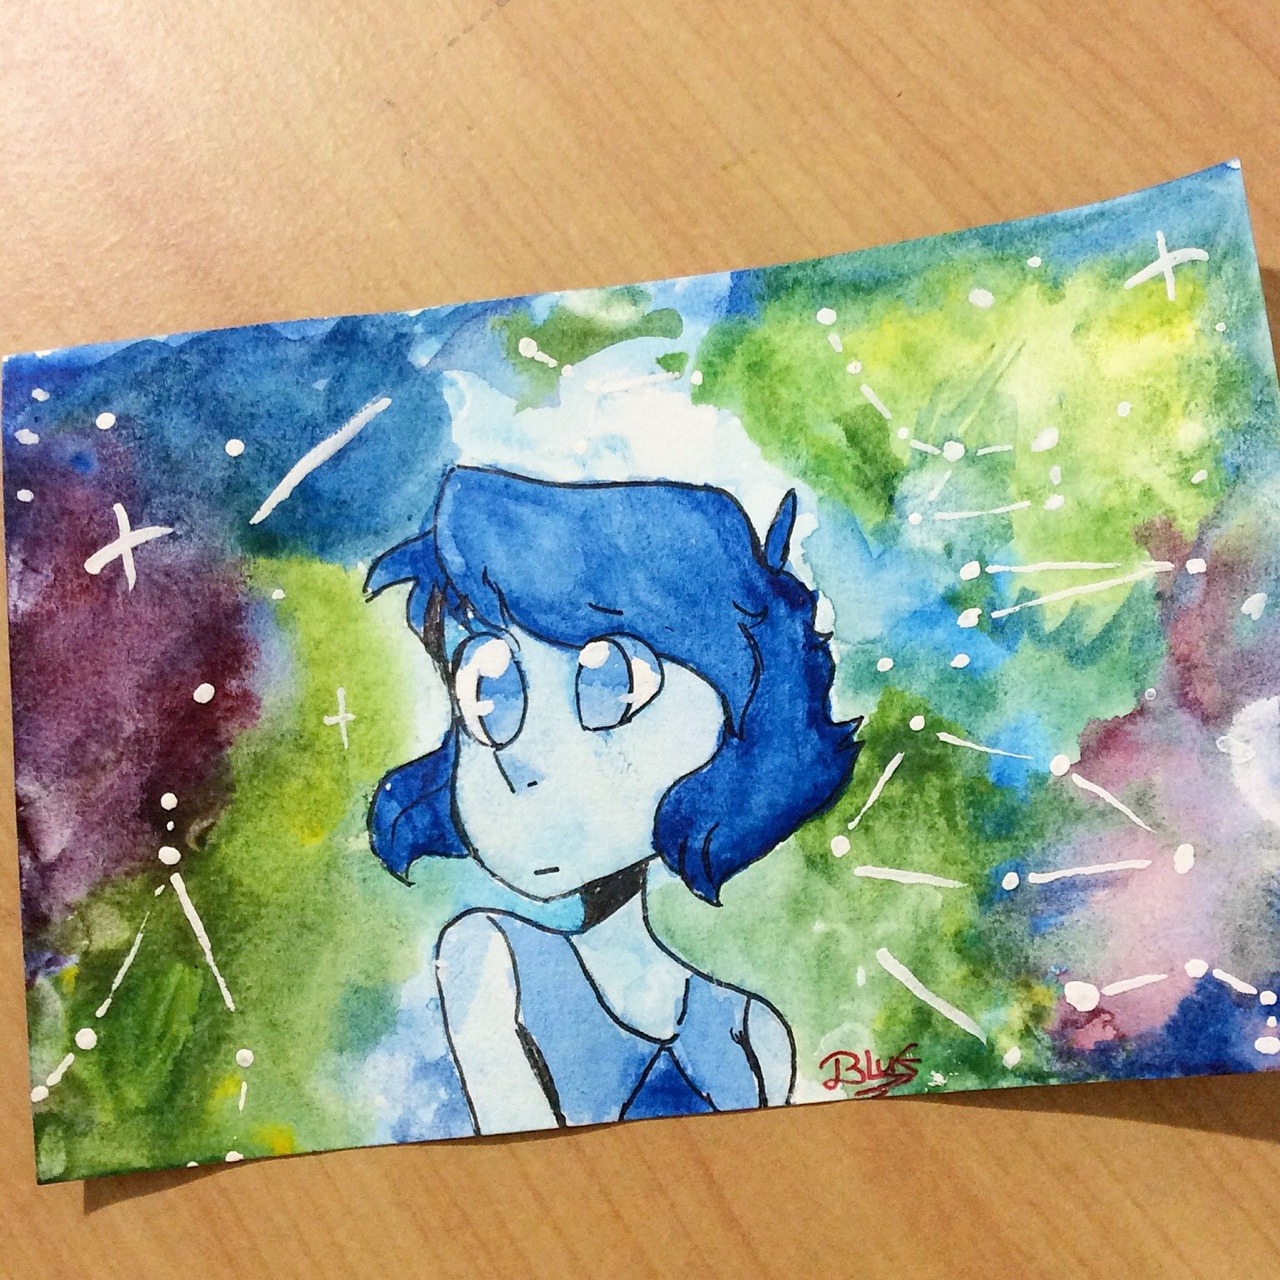 Some Lapis Watercolours because my drawing tablet is broken and I don’t have money to buy a new one or repair it so yeah. And also because I wanted to draw something with constellations.